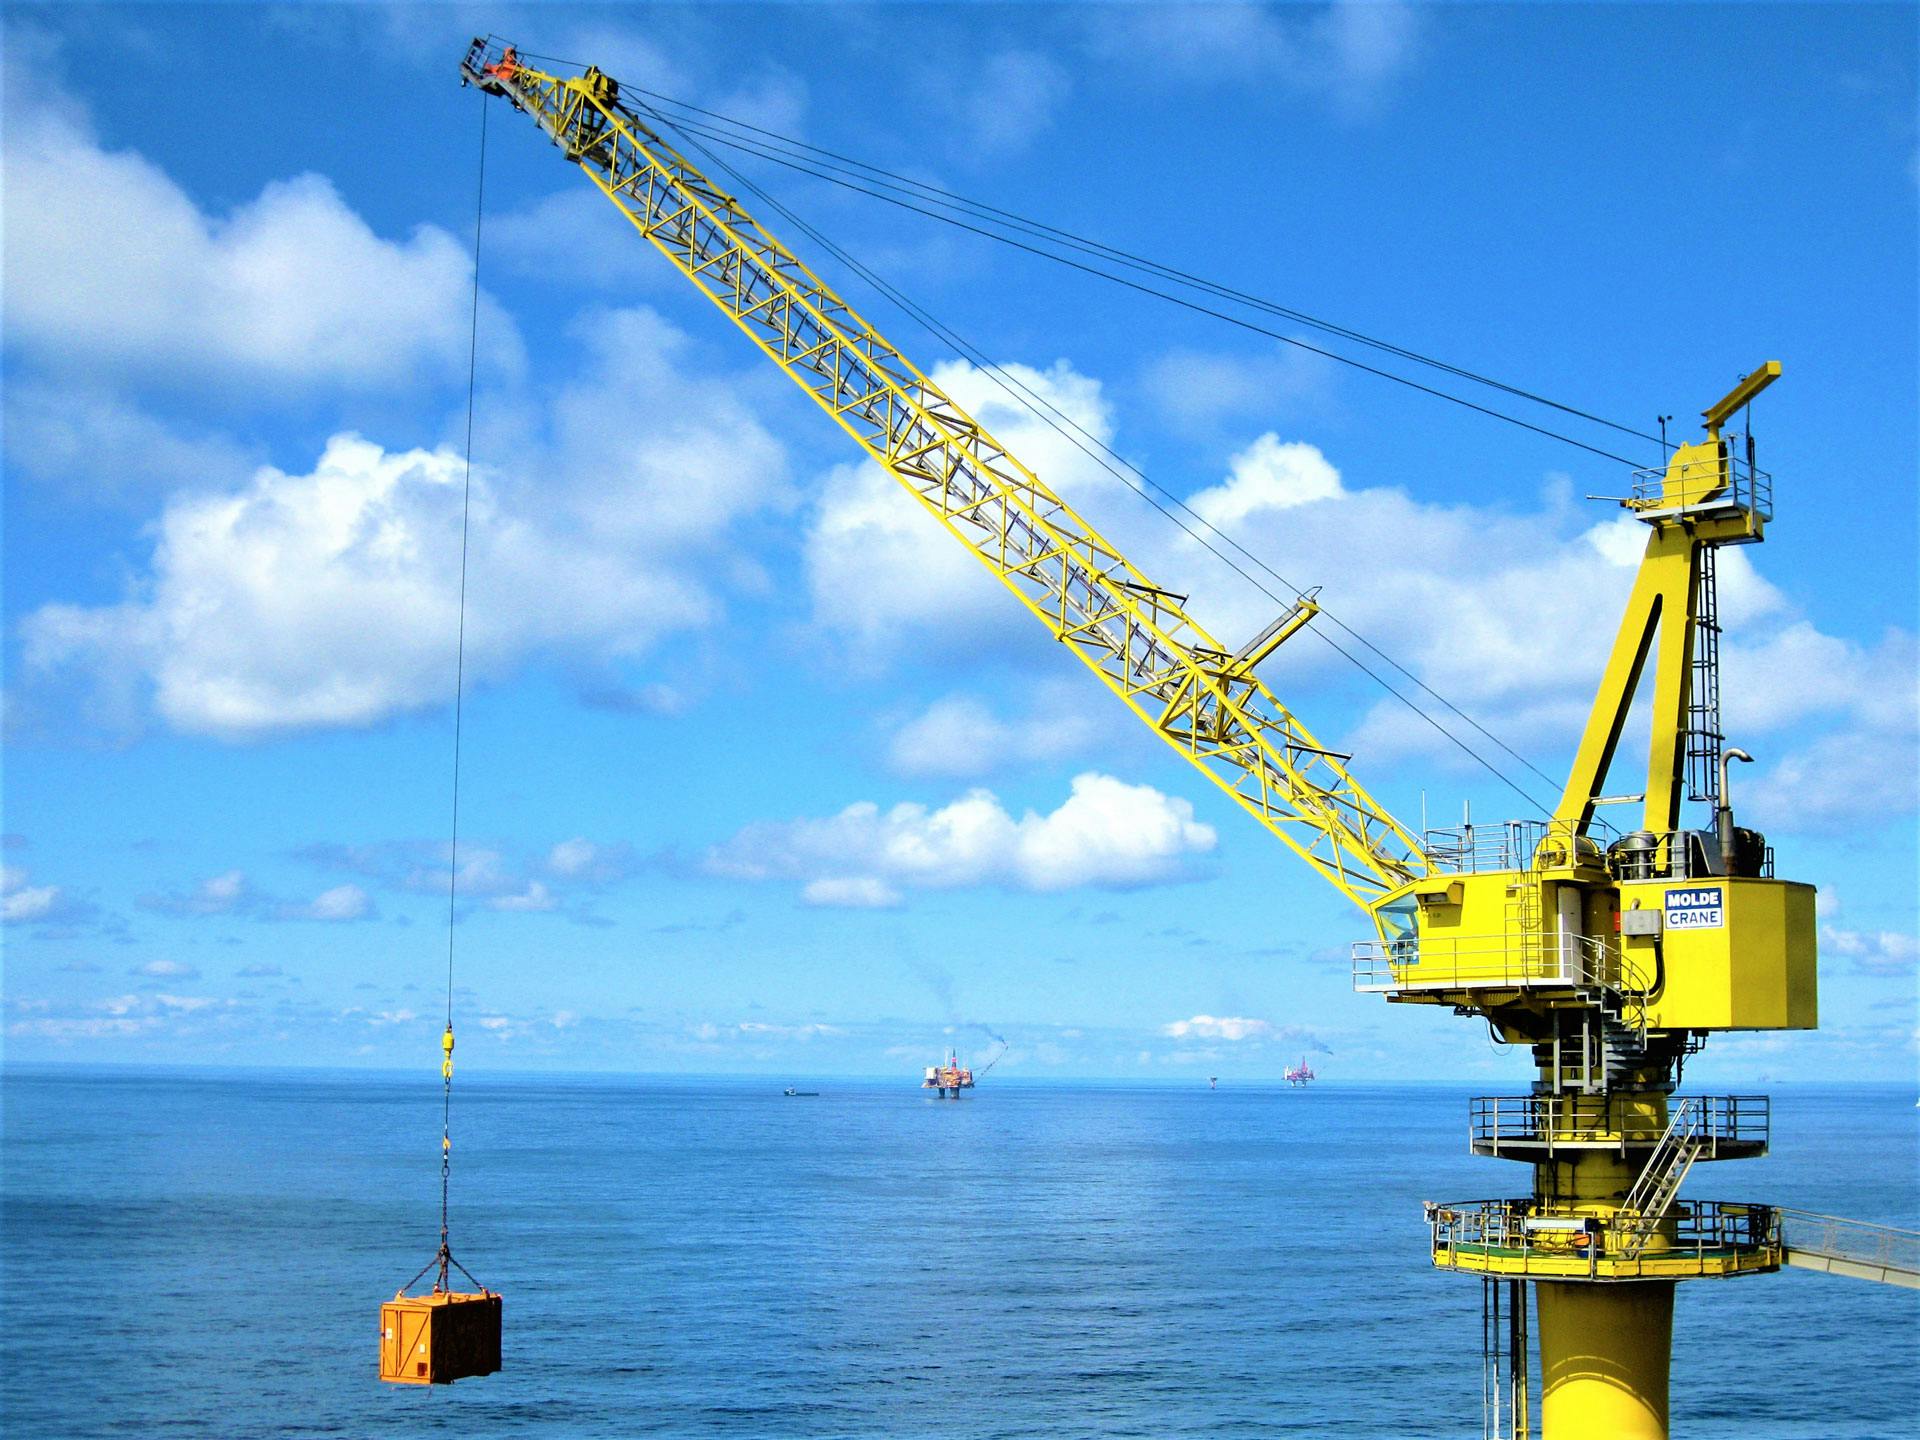 MoldeCrane lifting orange container, with clouds and the horizon in the background